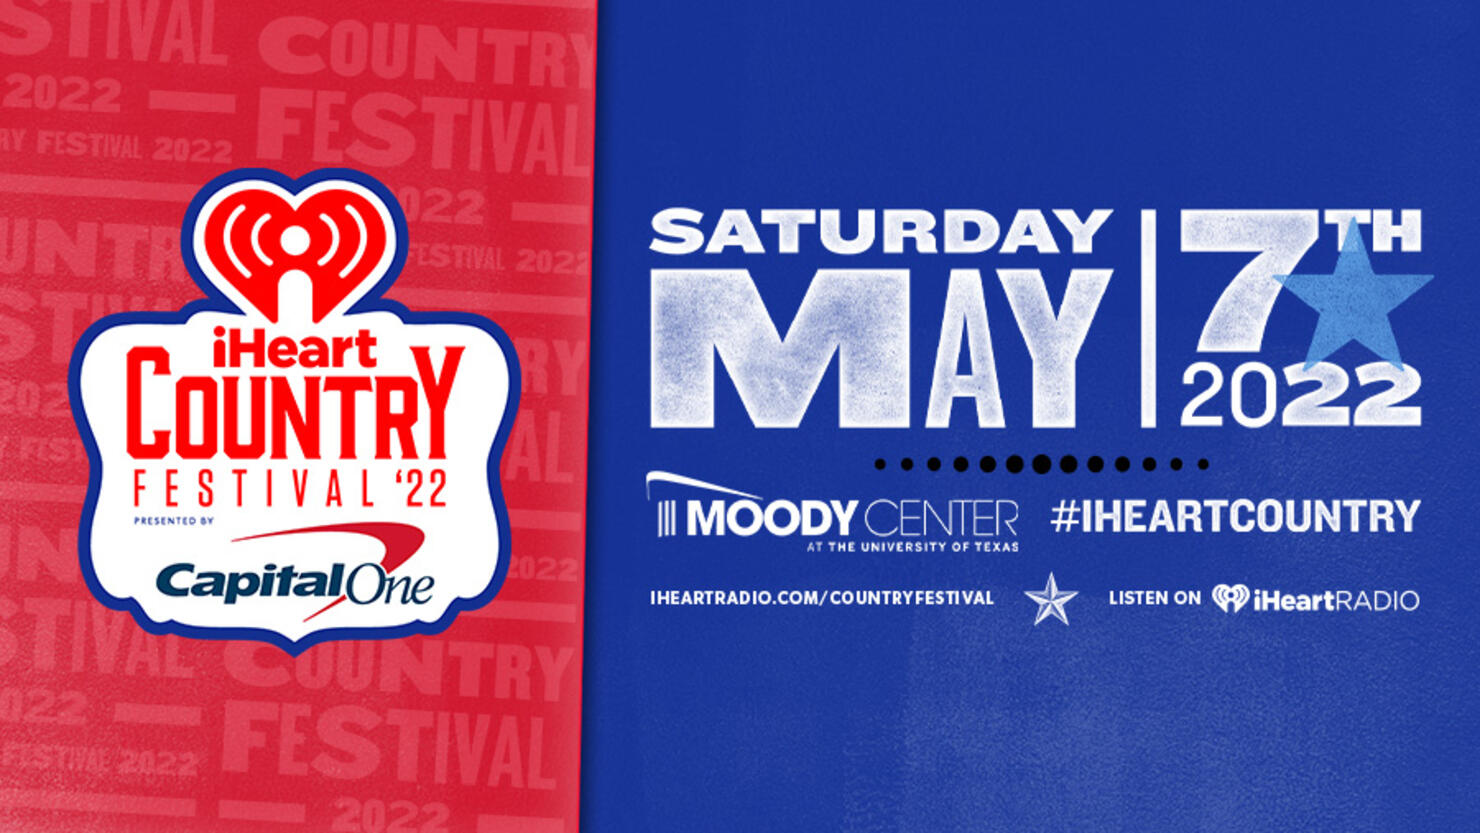 iHeartCountry Festival presented by Capital One